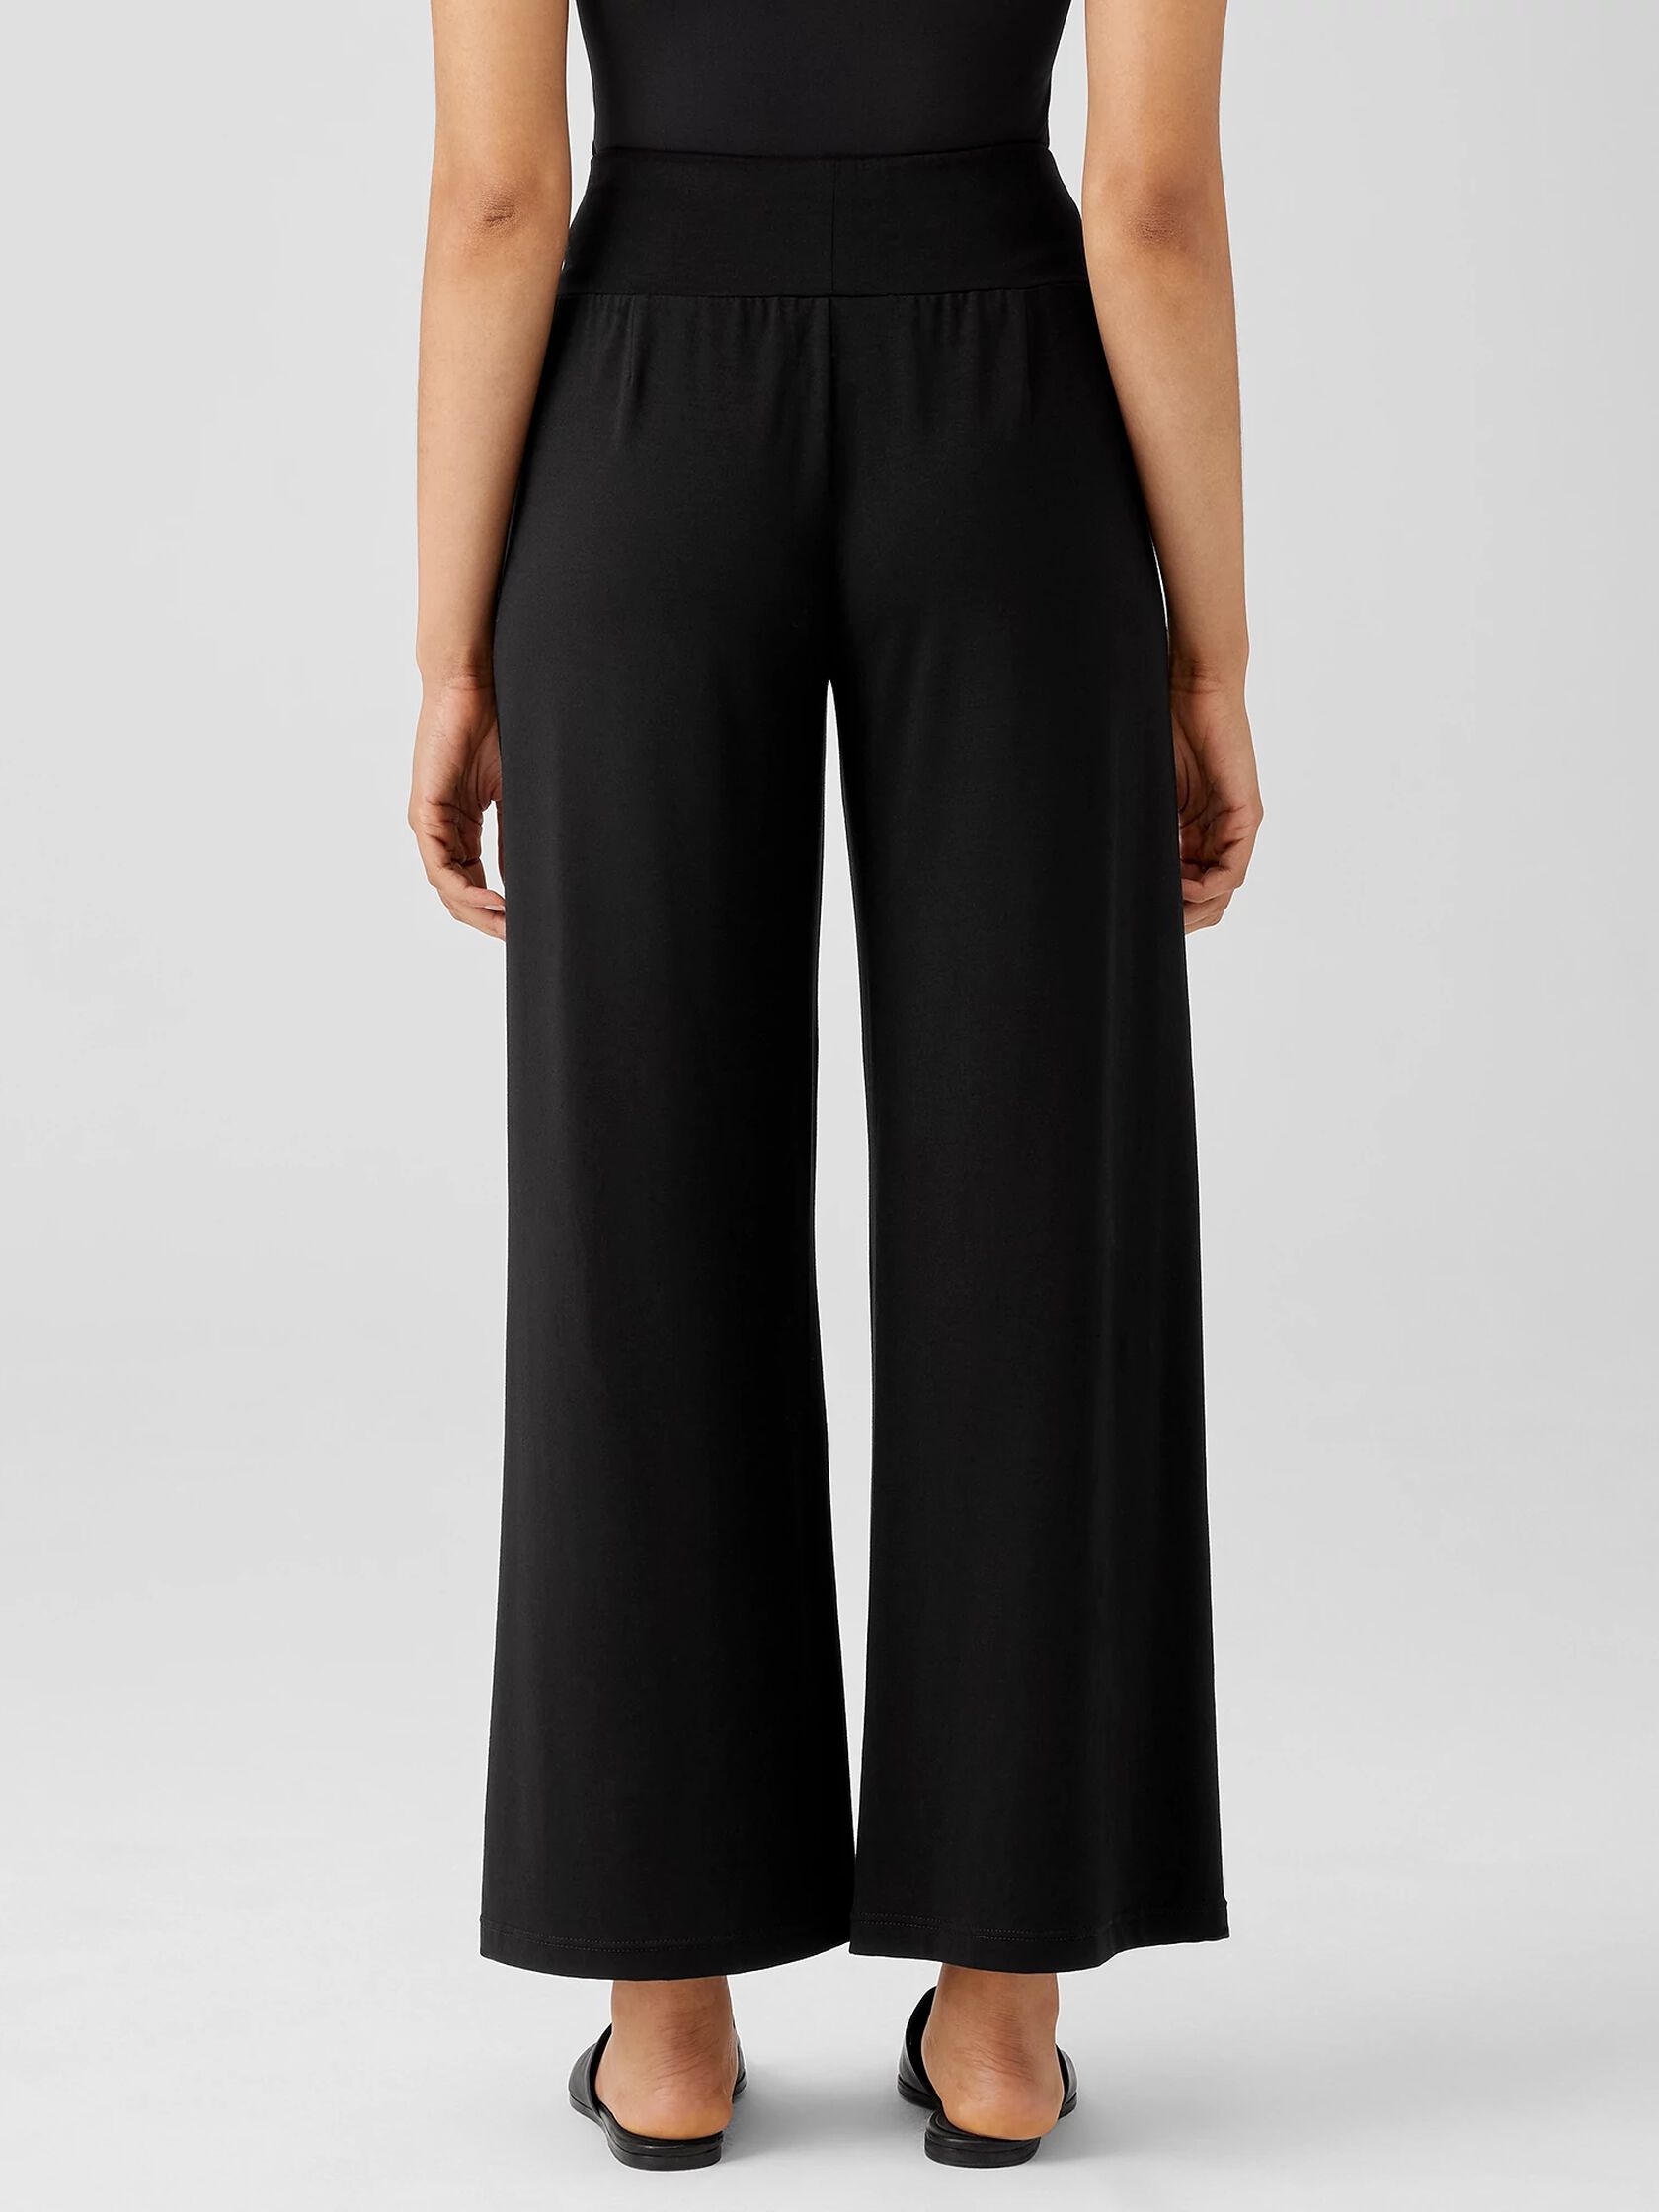 Stretch Jersey Knit Wide-Leg Pant | EILEEN FISHER